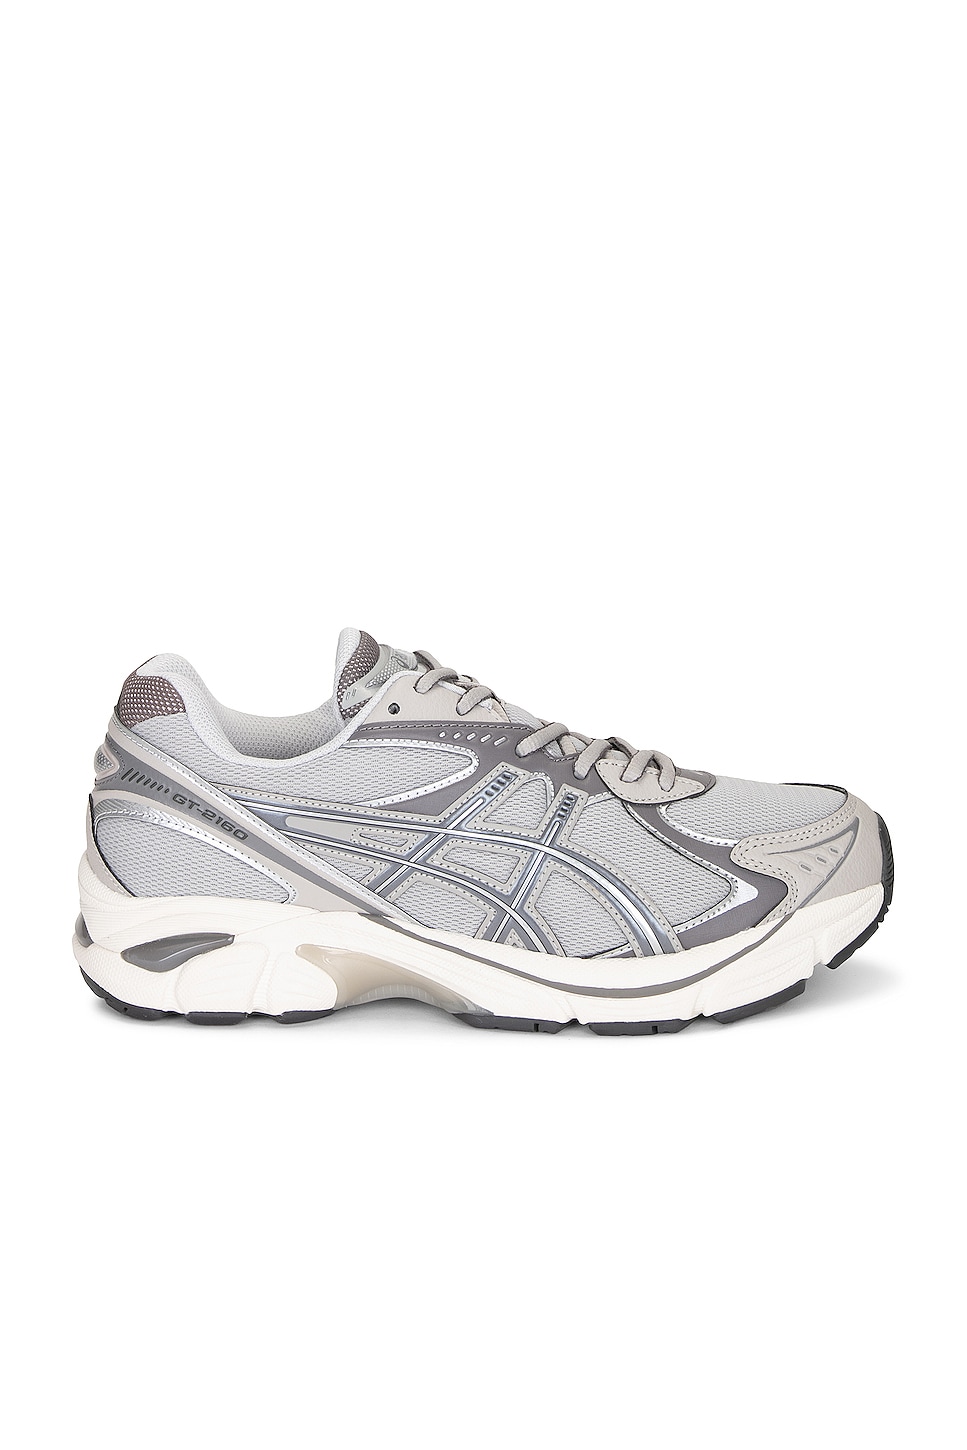 Asics Gt-2160 Sneaker in Oyster Grey & Carbon | FWRD